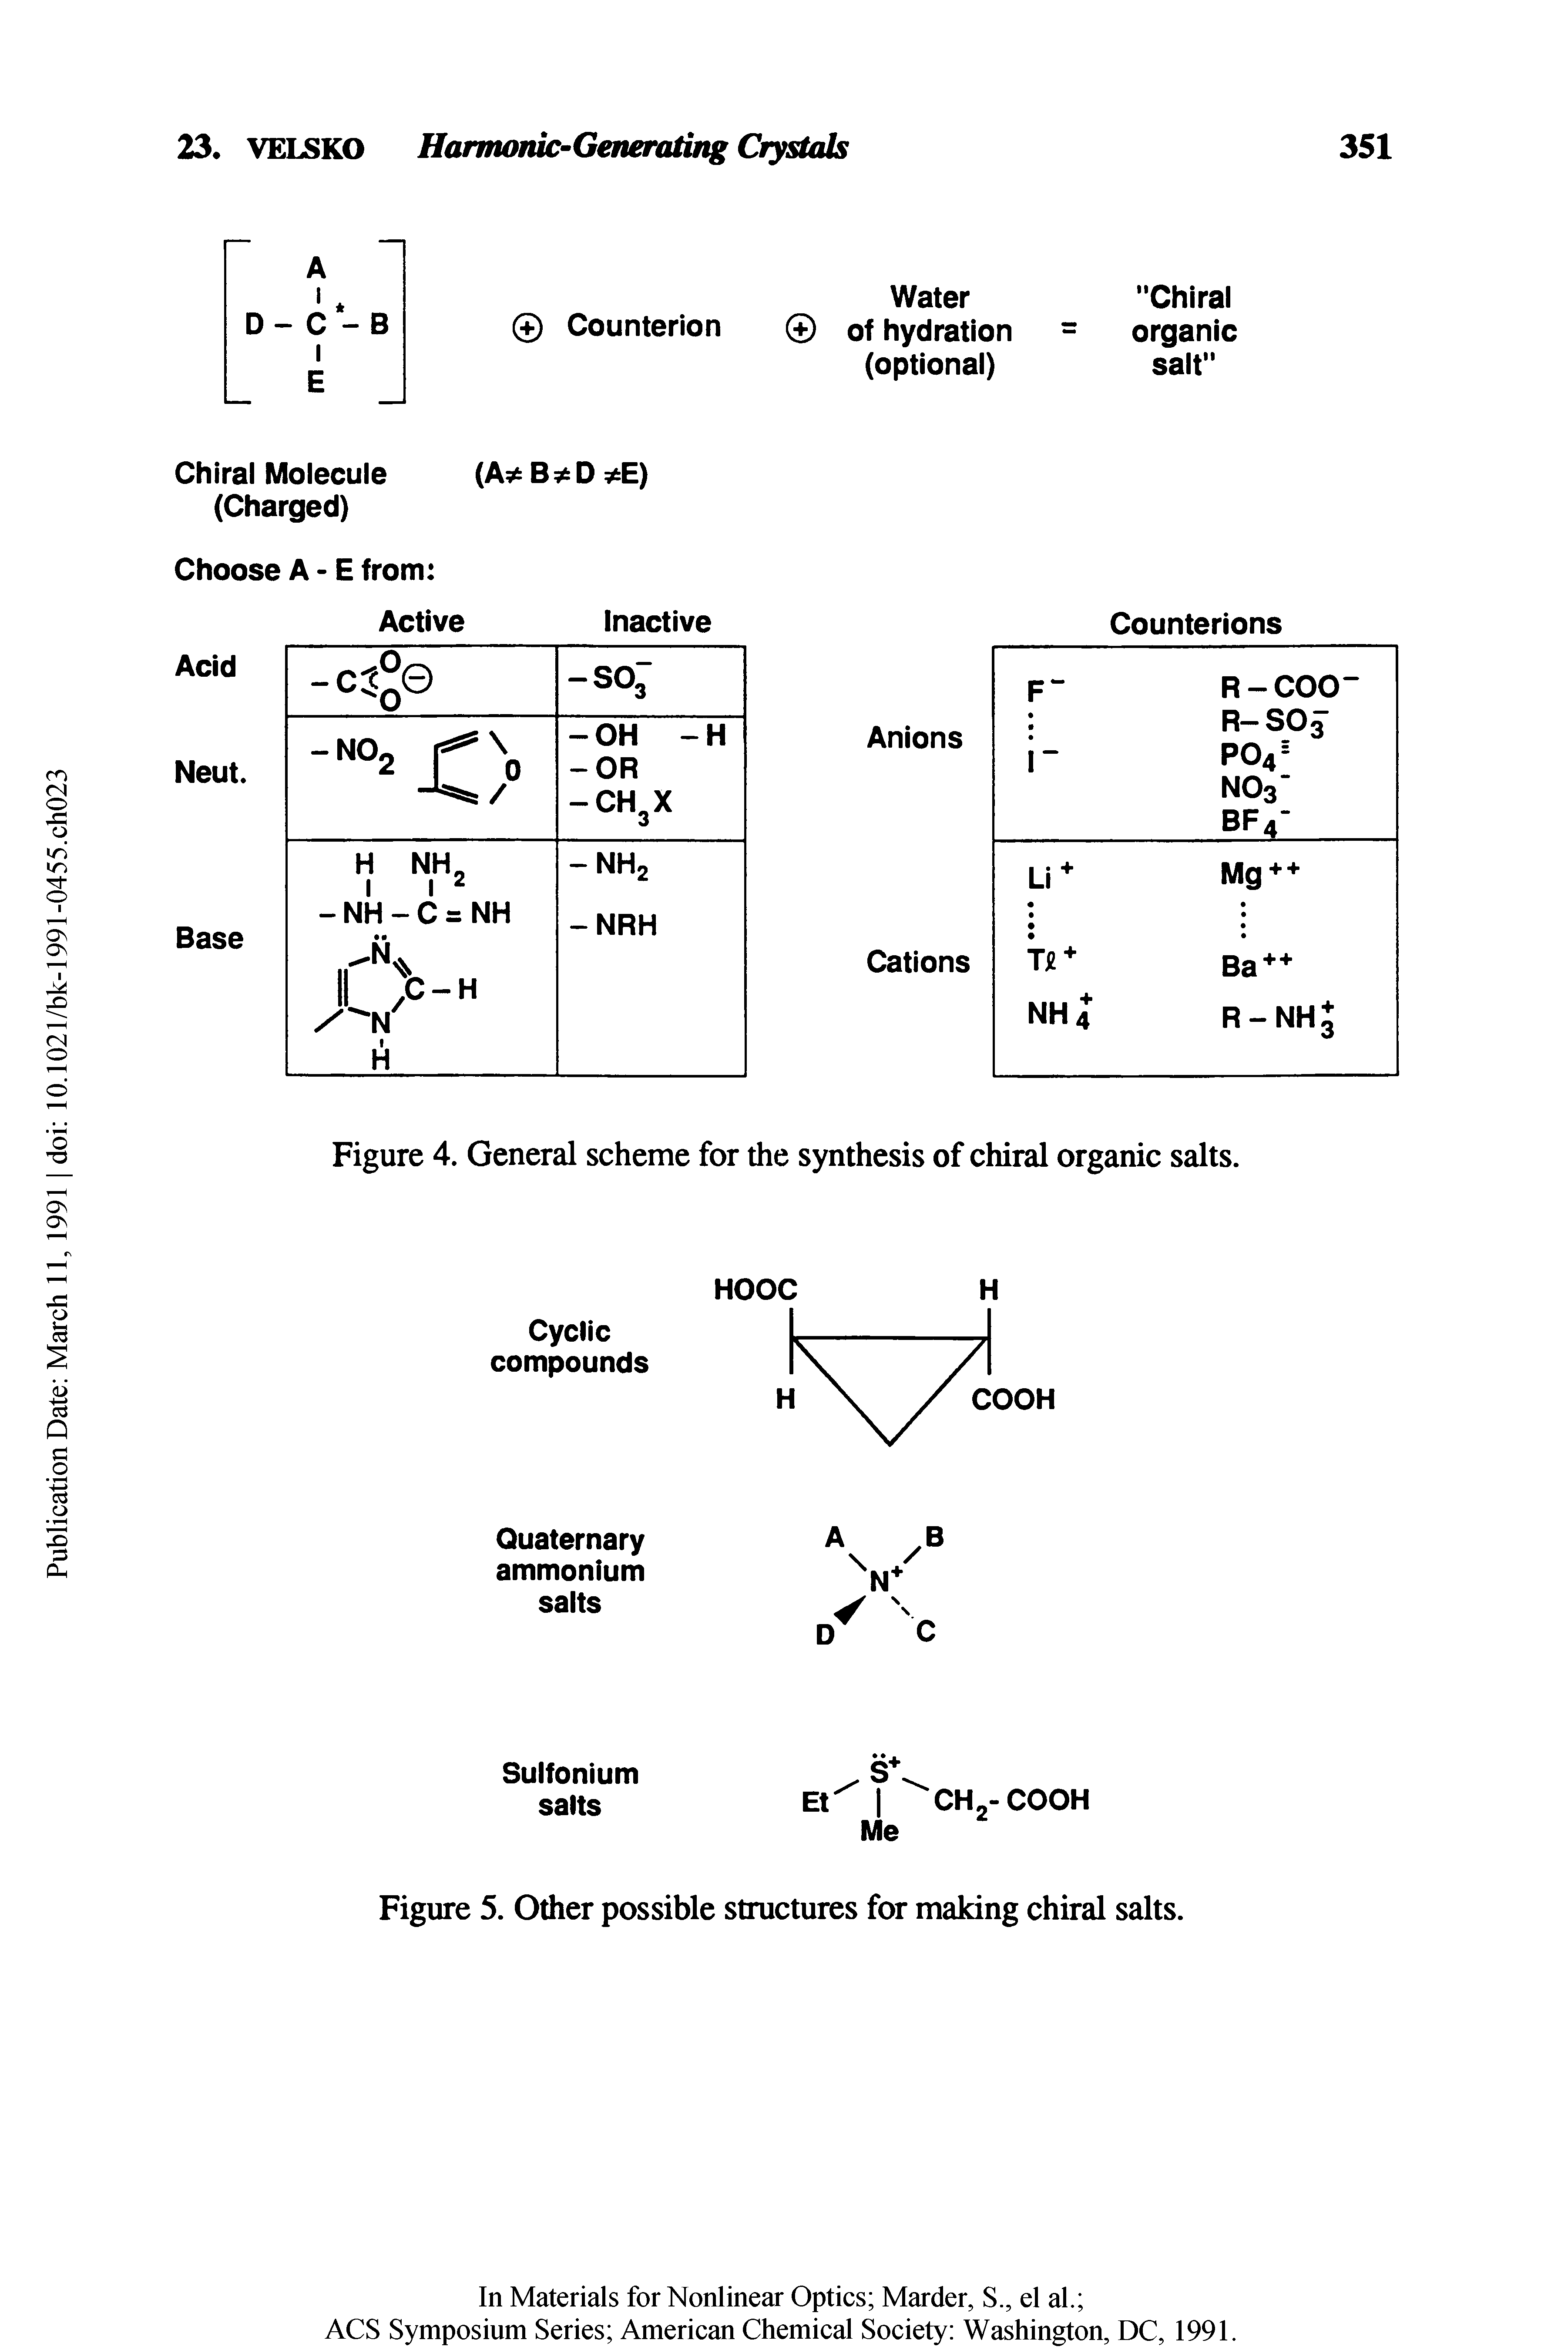 Figure 4. General scheme for the synthesis of chiral organic salts.